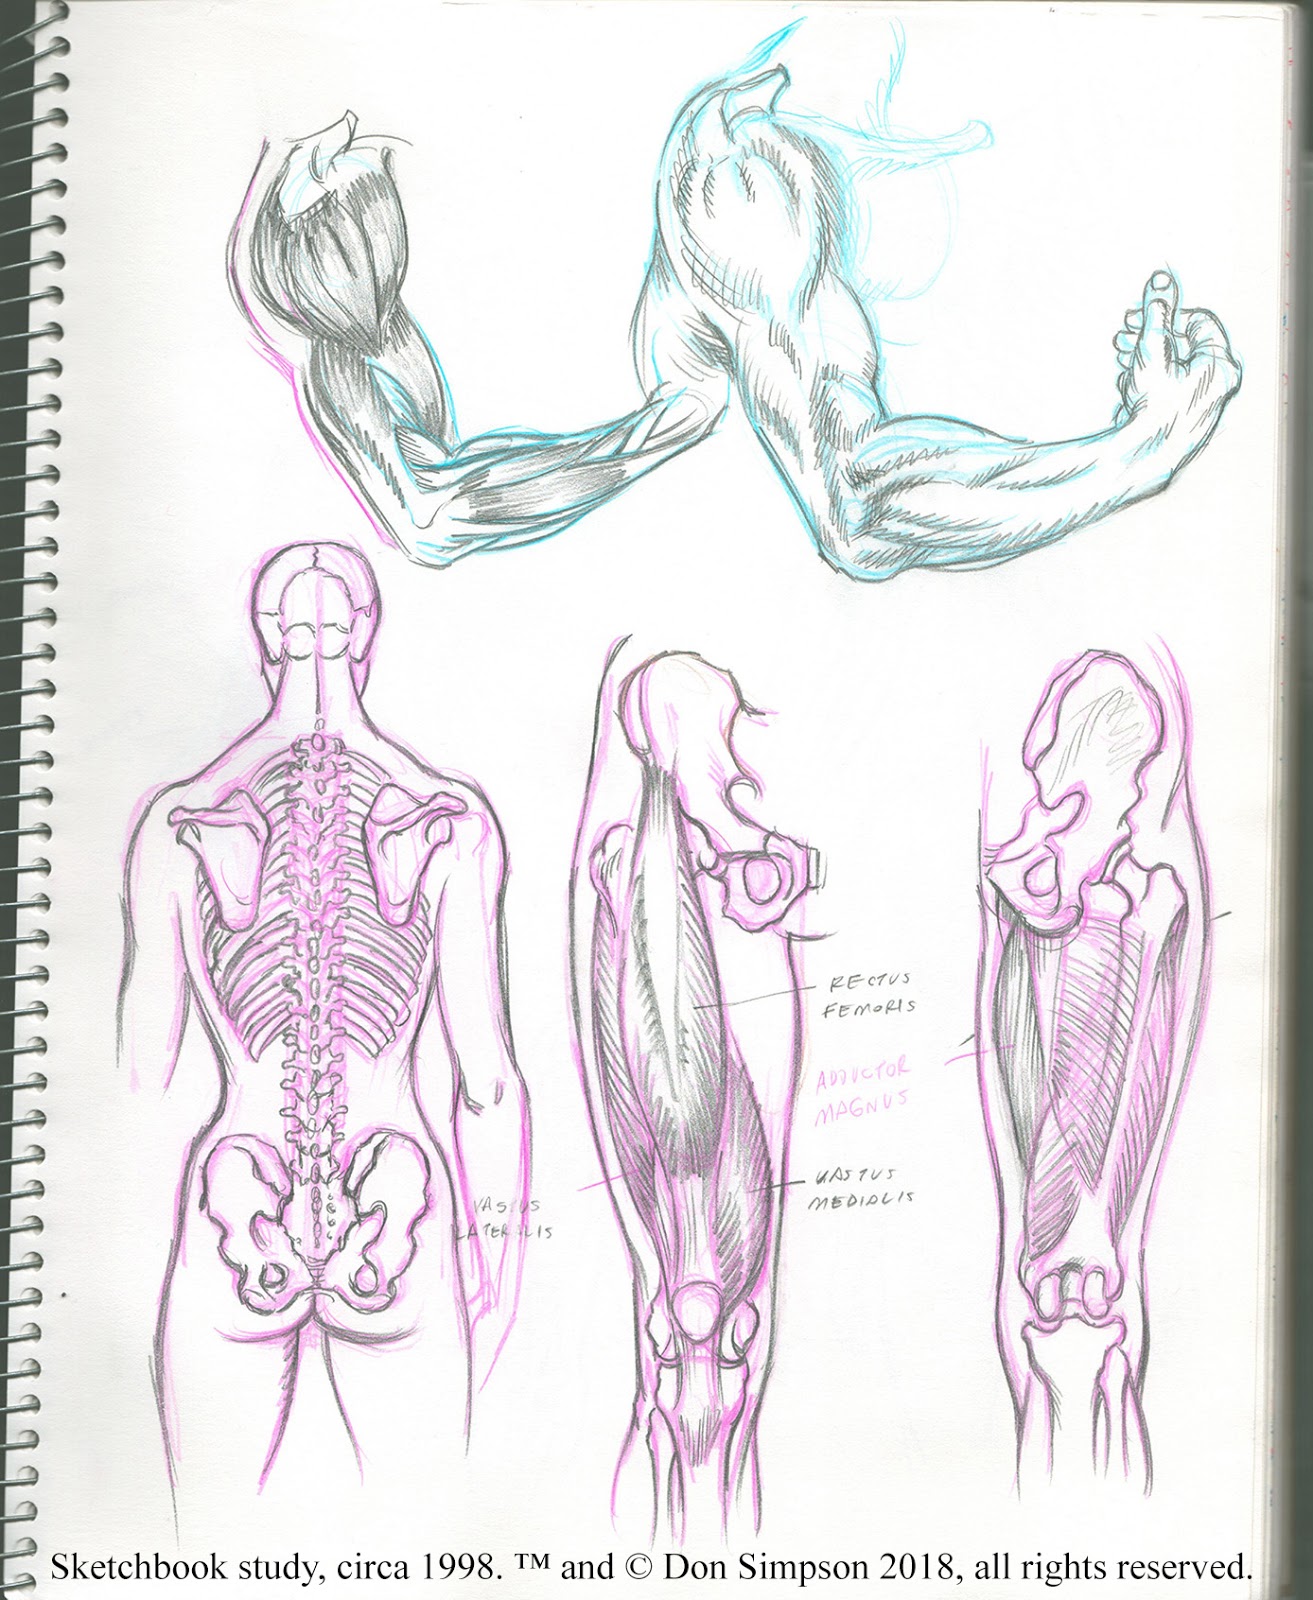 How To Draw The Hunan Figure Drawing An Anatomical Approach - Louise Gordon